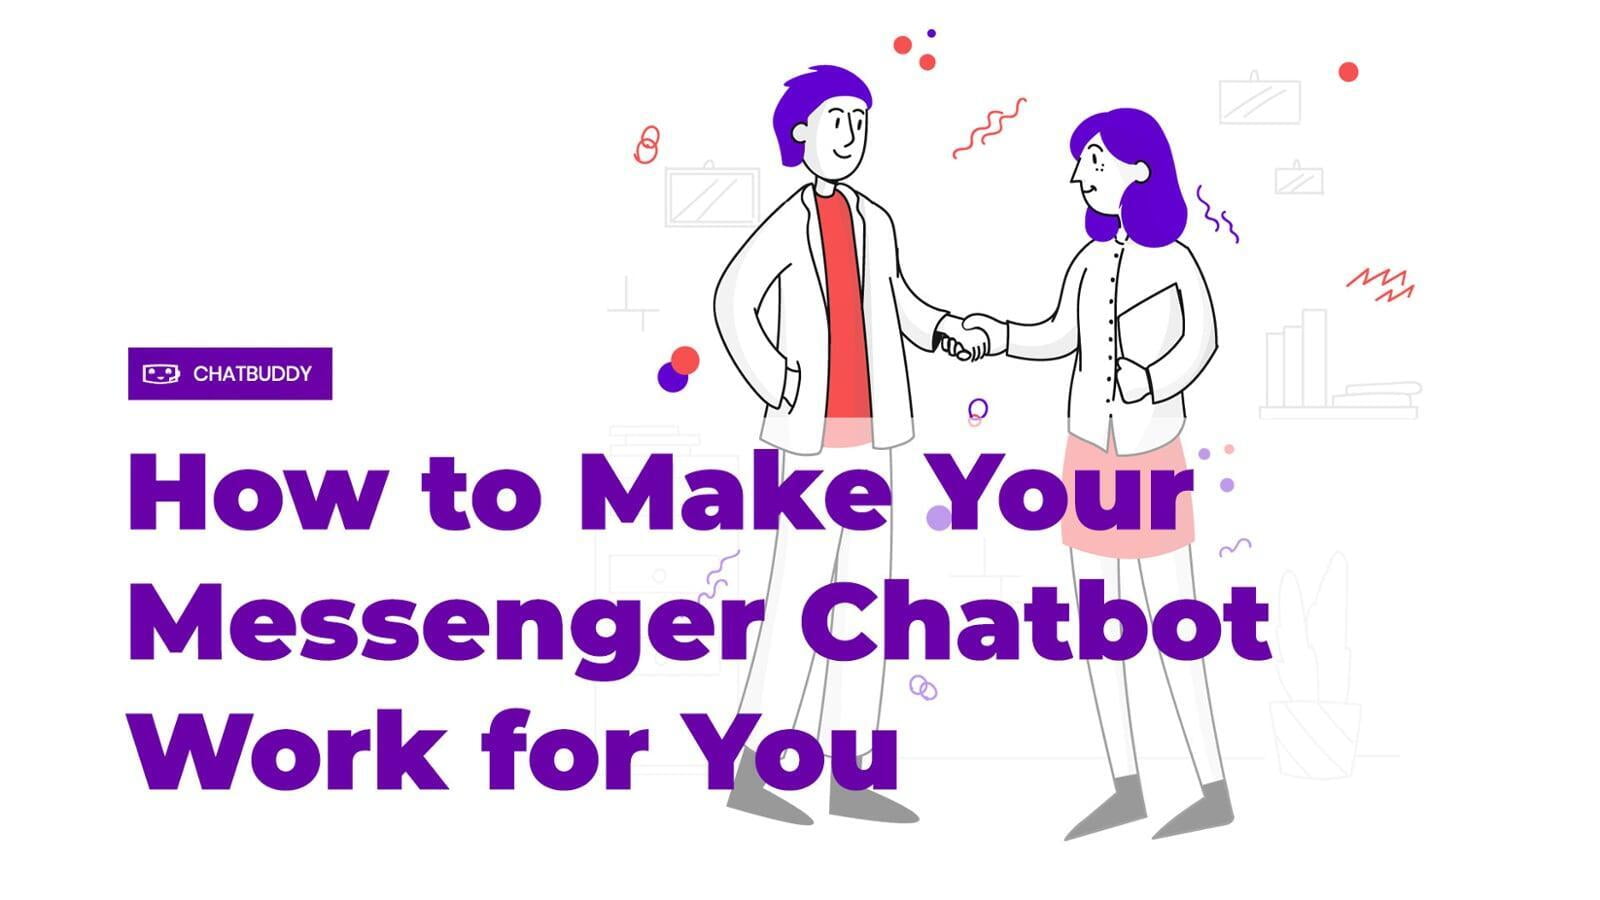 How to Make Your Messenger Chatbot Work for You